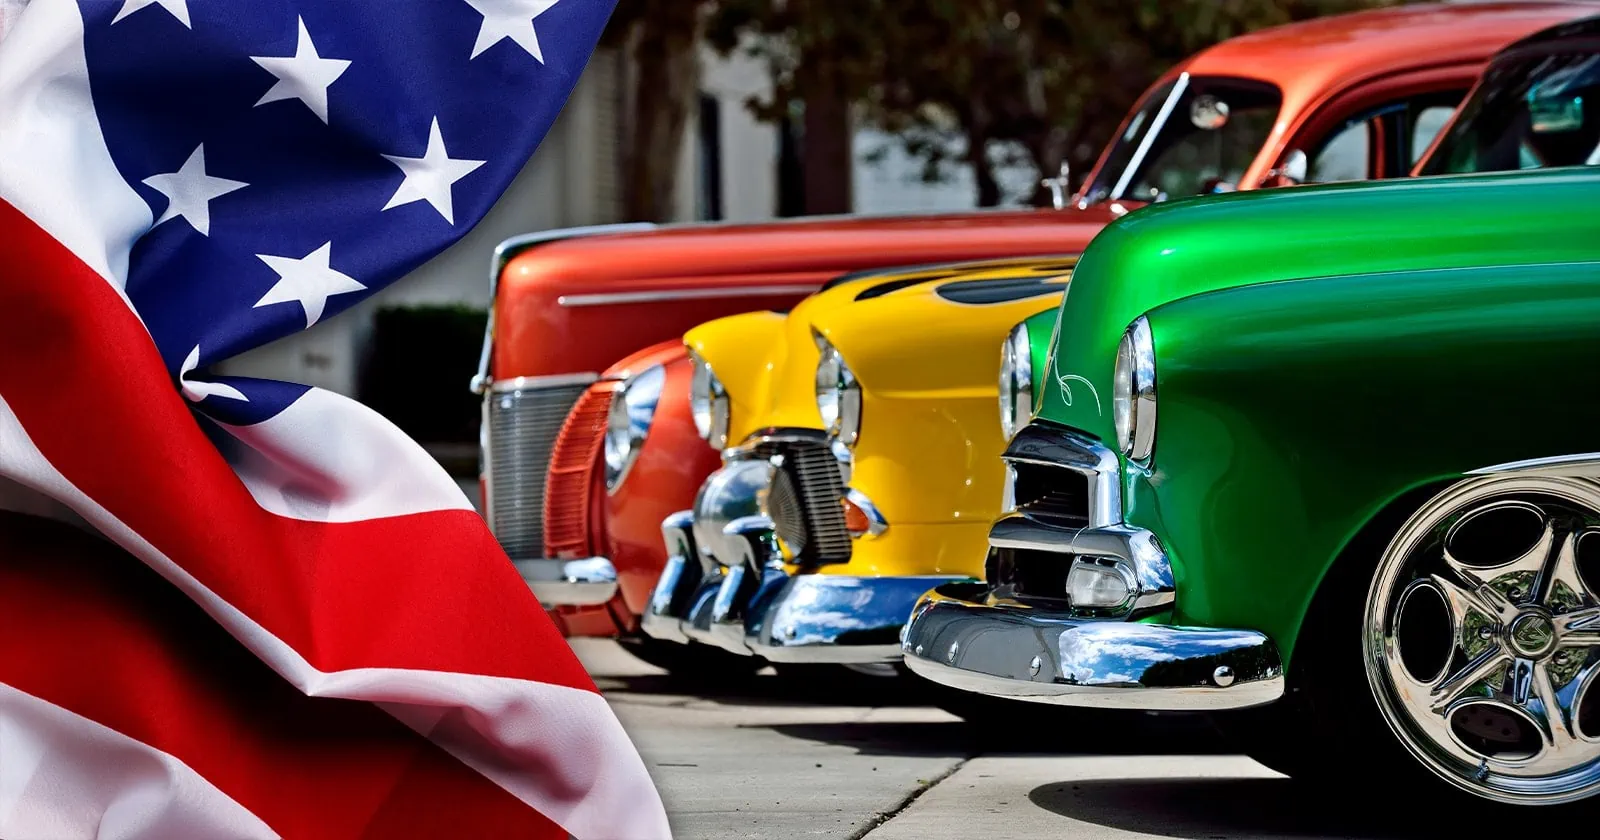 Classics by the Bay This is How Miami Dade Will Celebrate the Classic Car Exhibition